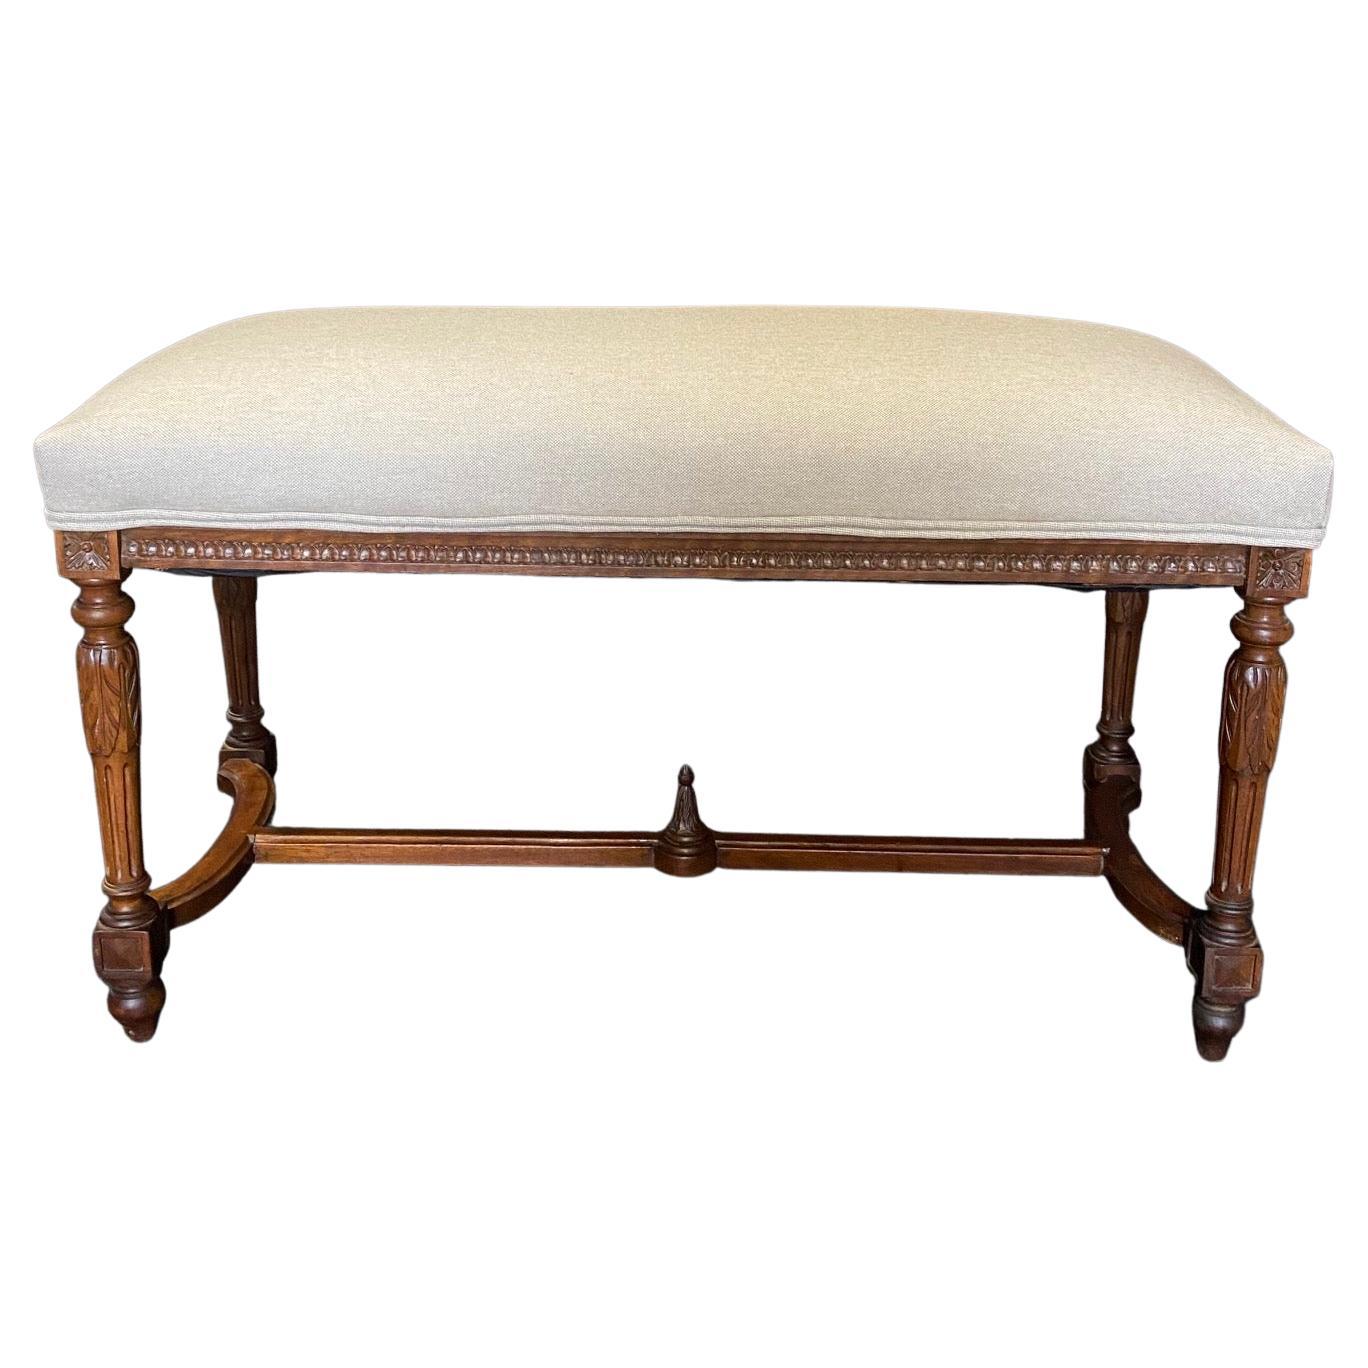 Antique French Louis XVI Walnut Upholstered Seat Bench For Sale